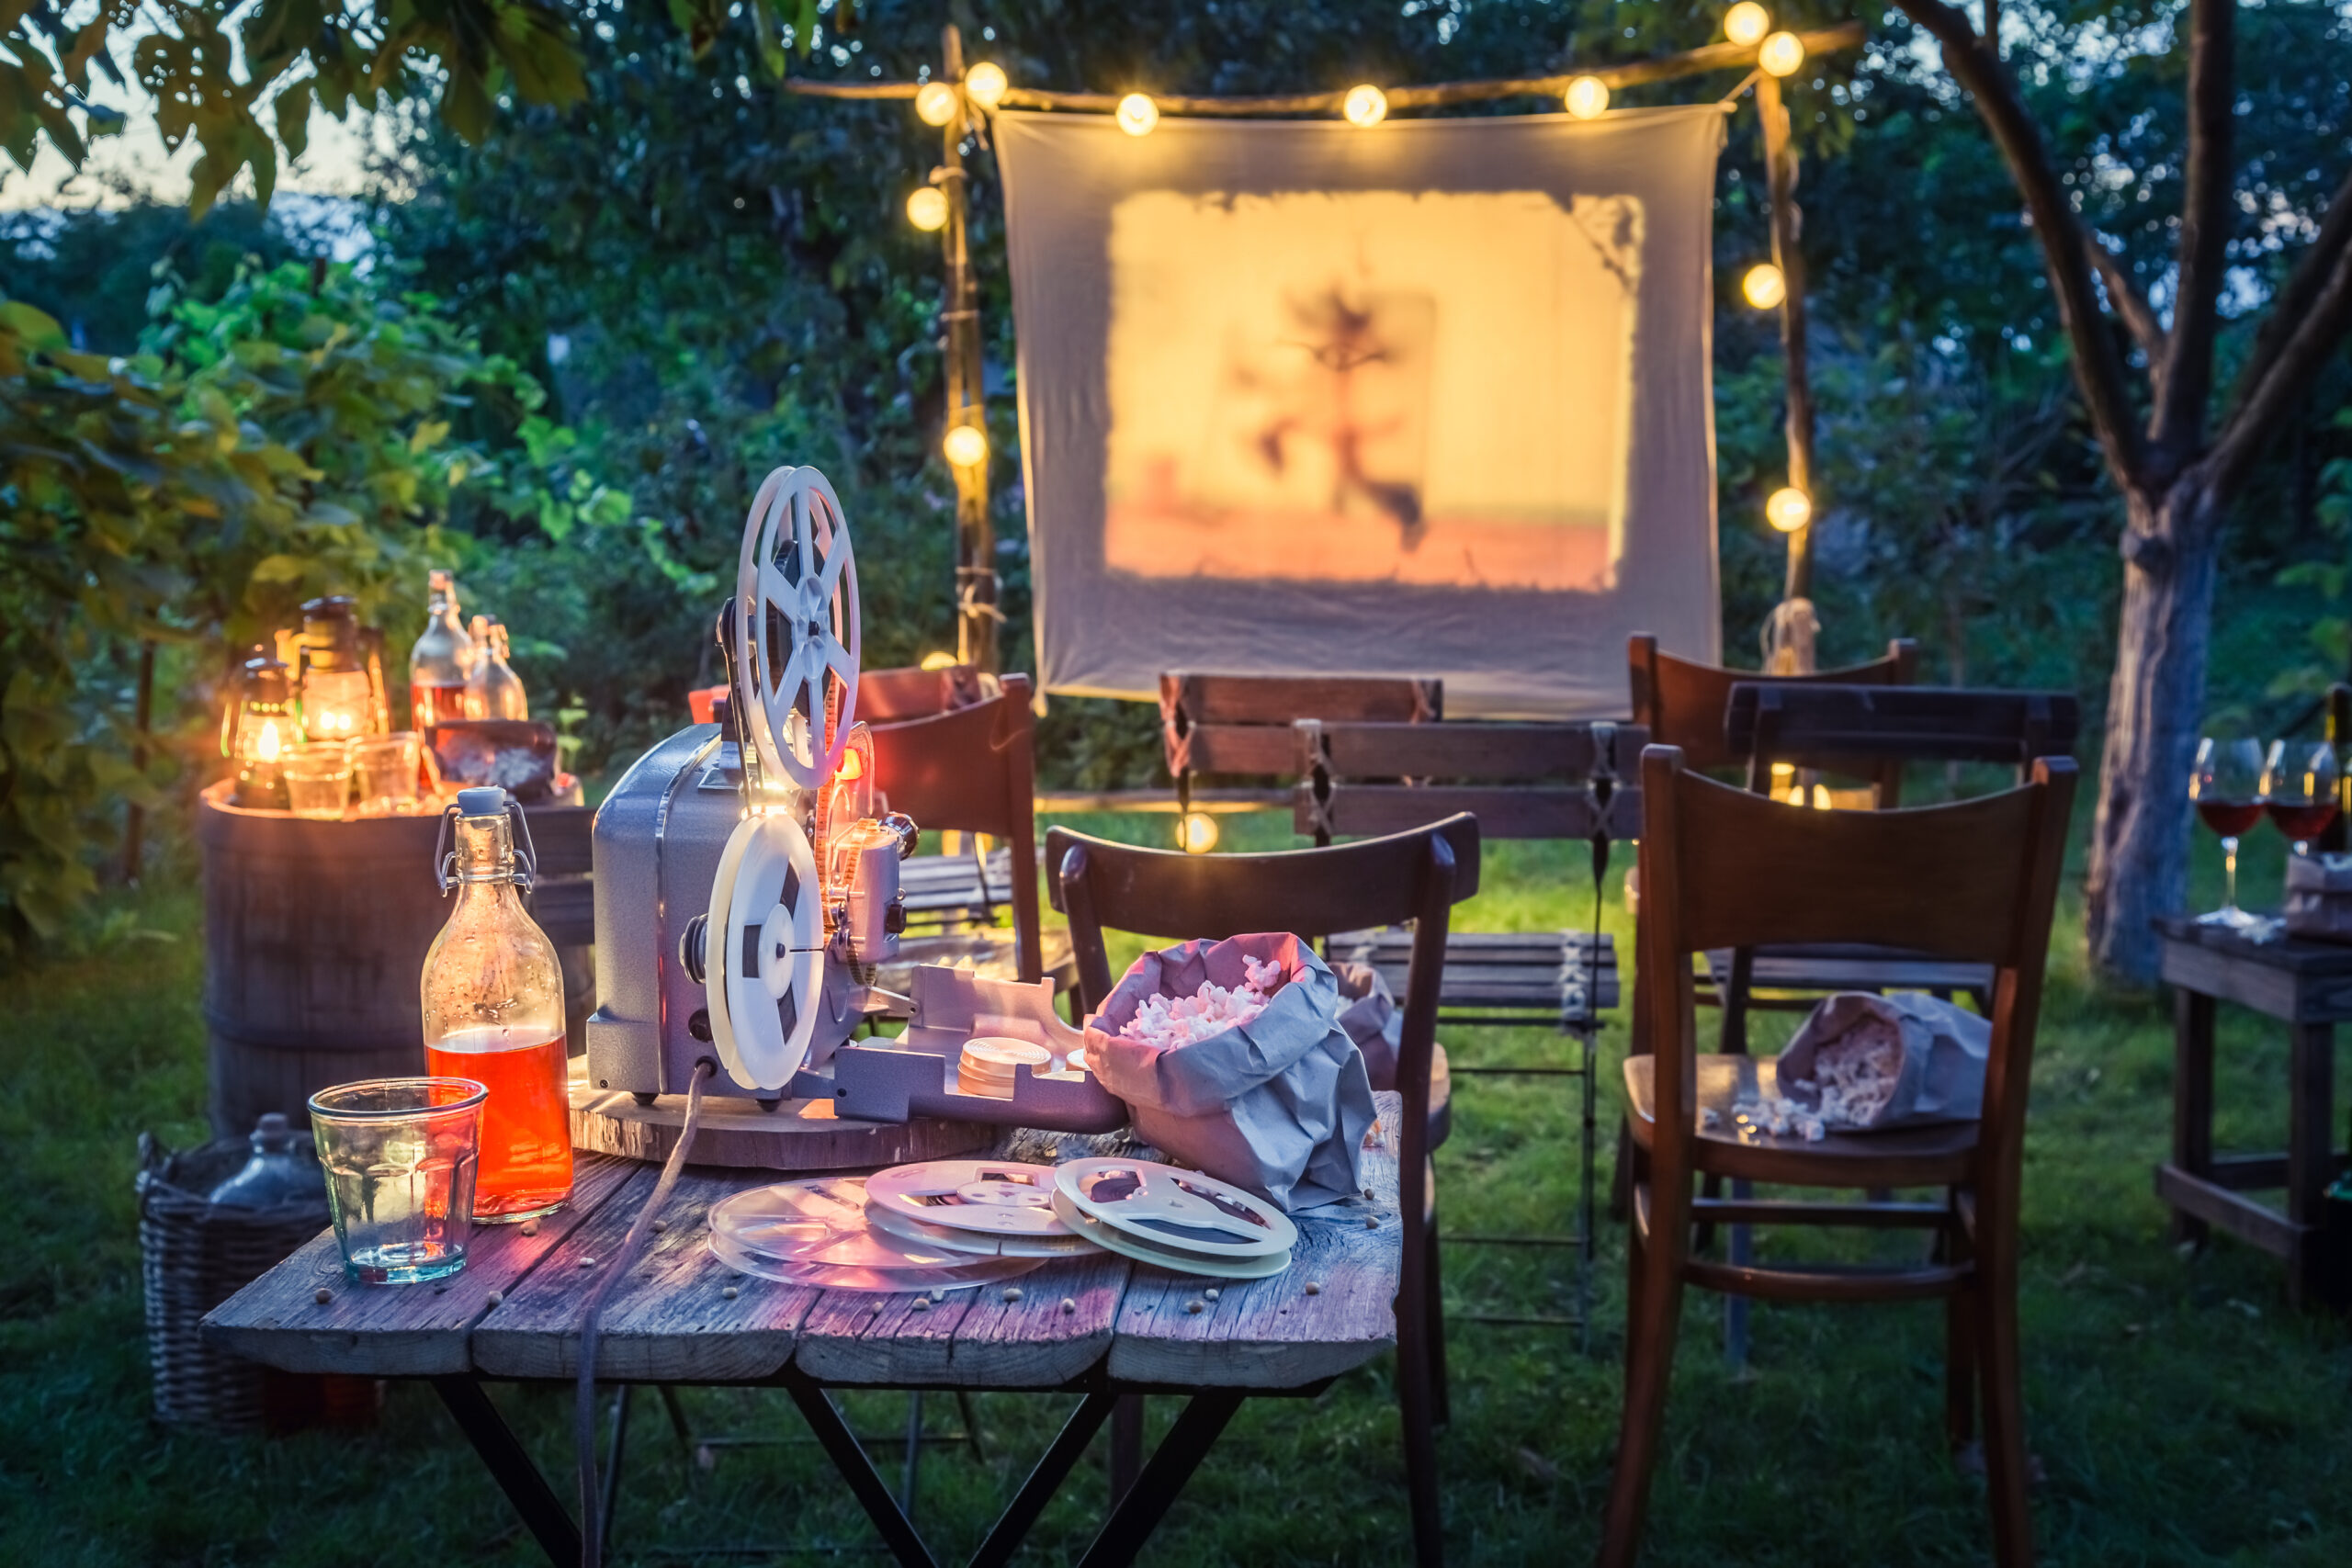 As the sun starts setting earlier and the evenings are becoming more brisk, there is no better time to spend an evening outside and take in a movie. Here are some steps on how to make your backyard the perfect movie experience for the whole family!